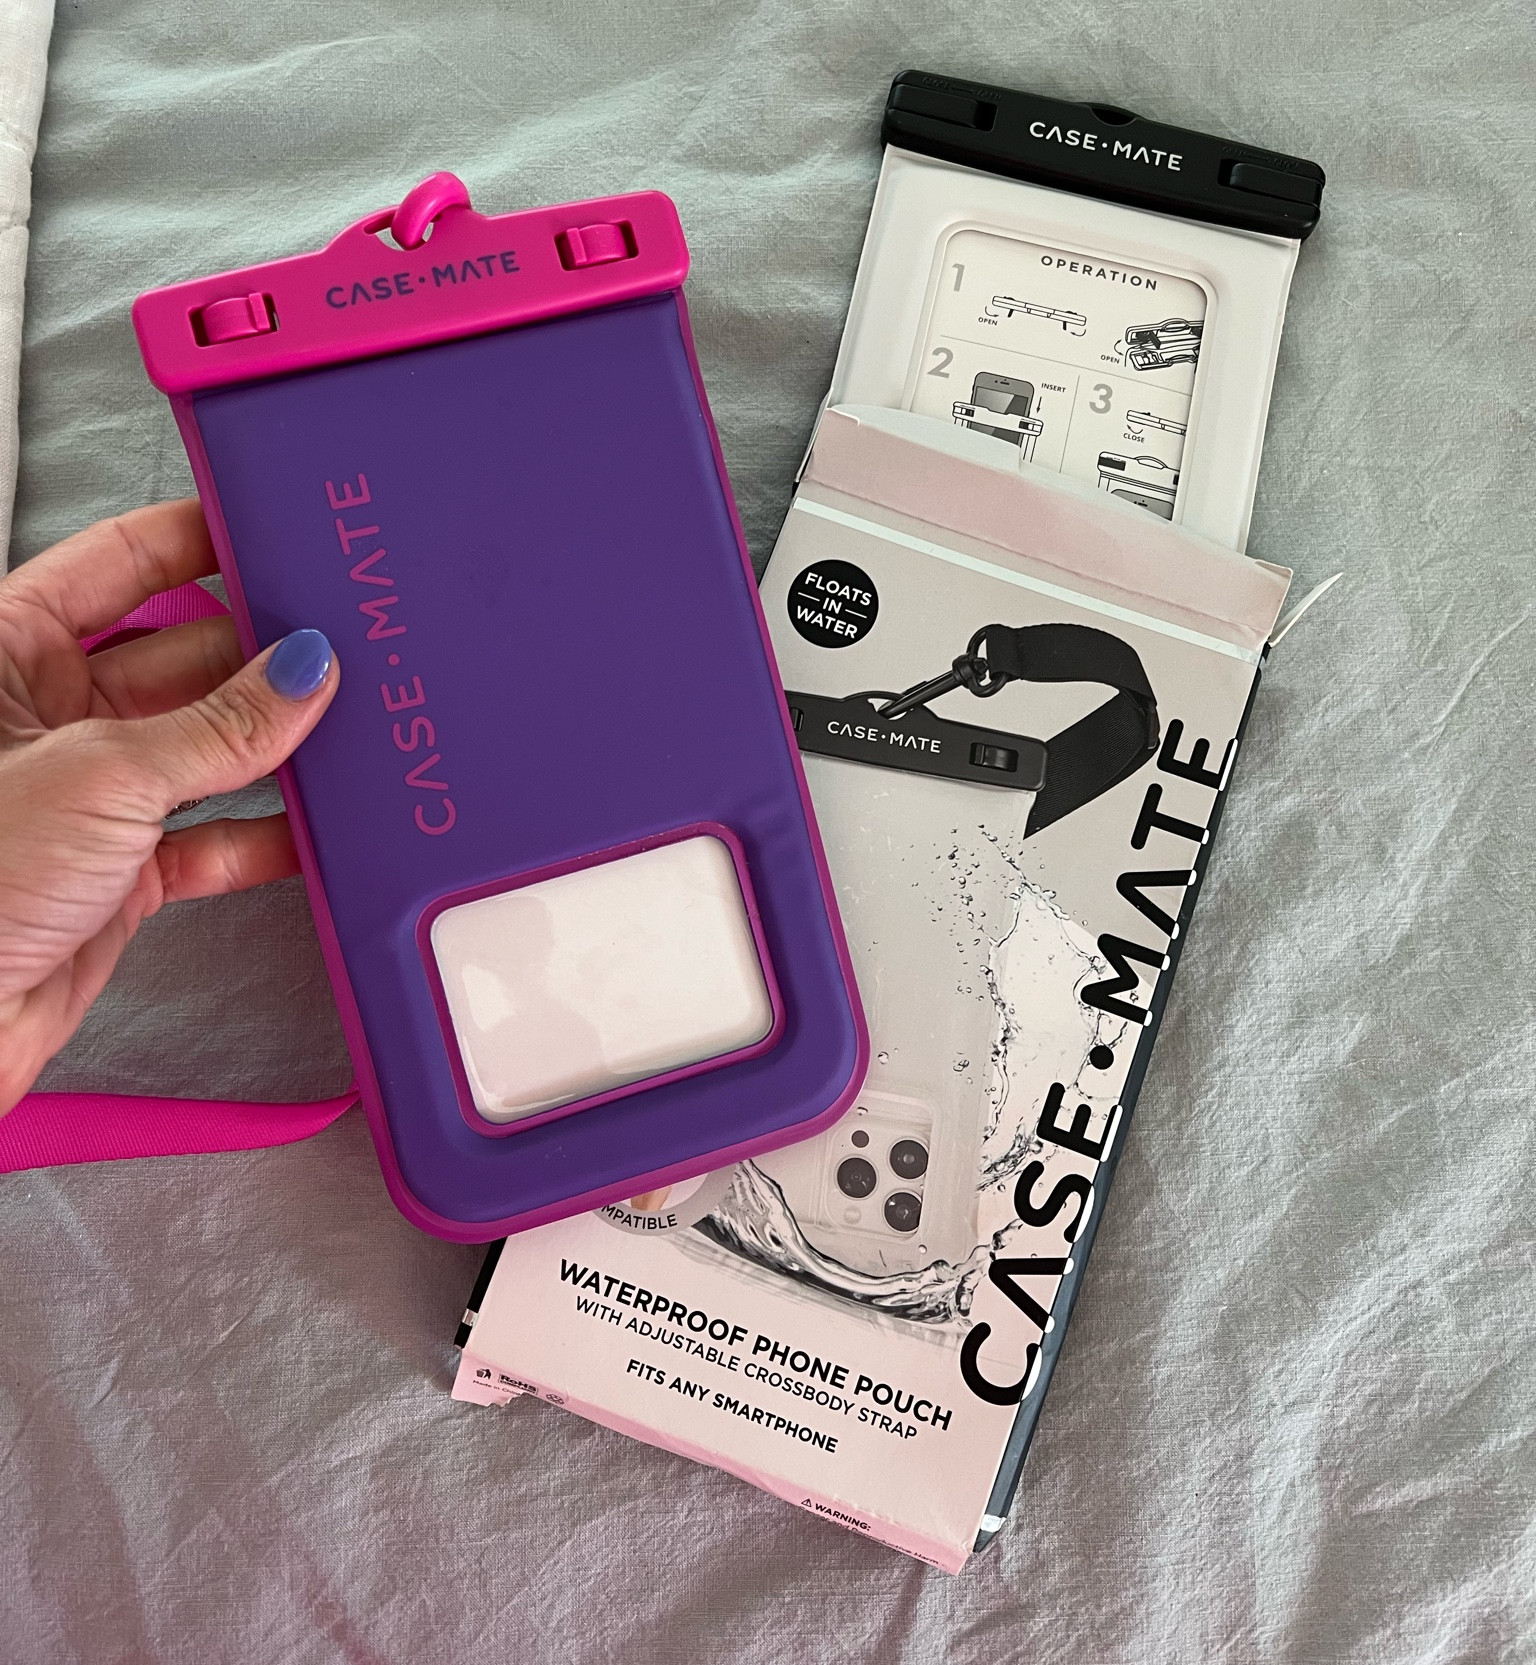 Case-mate Floating Waterproof Phone Pouch : Target